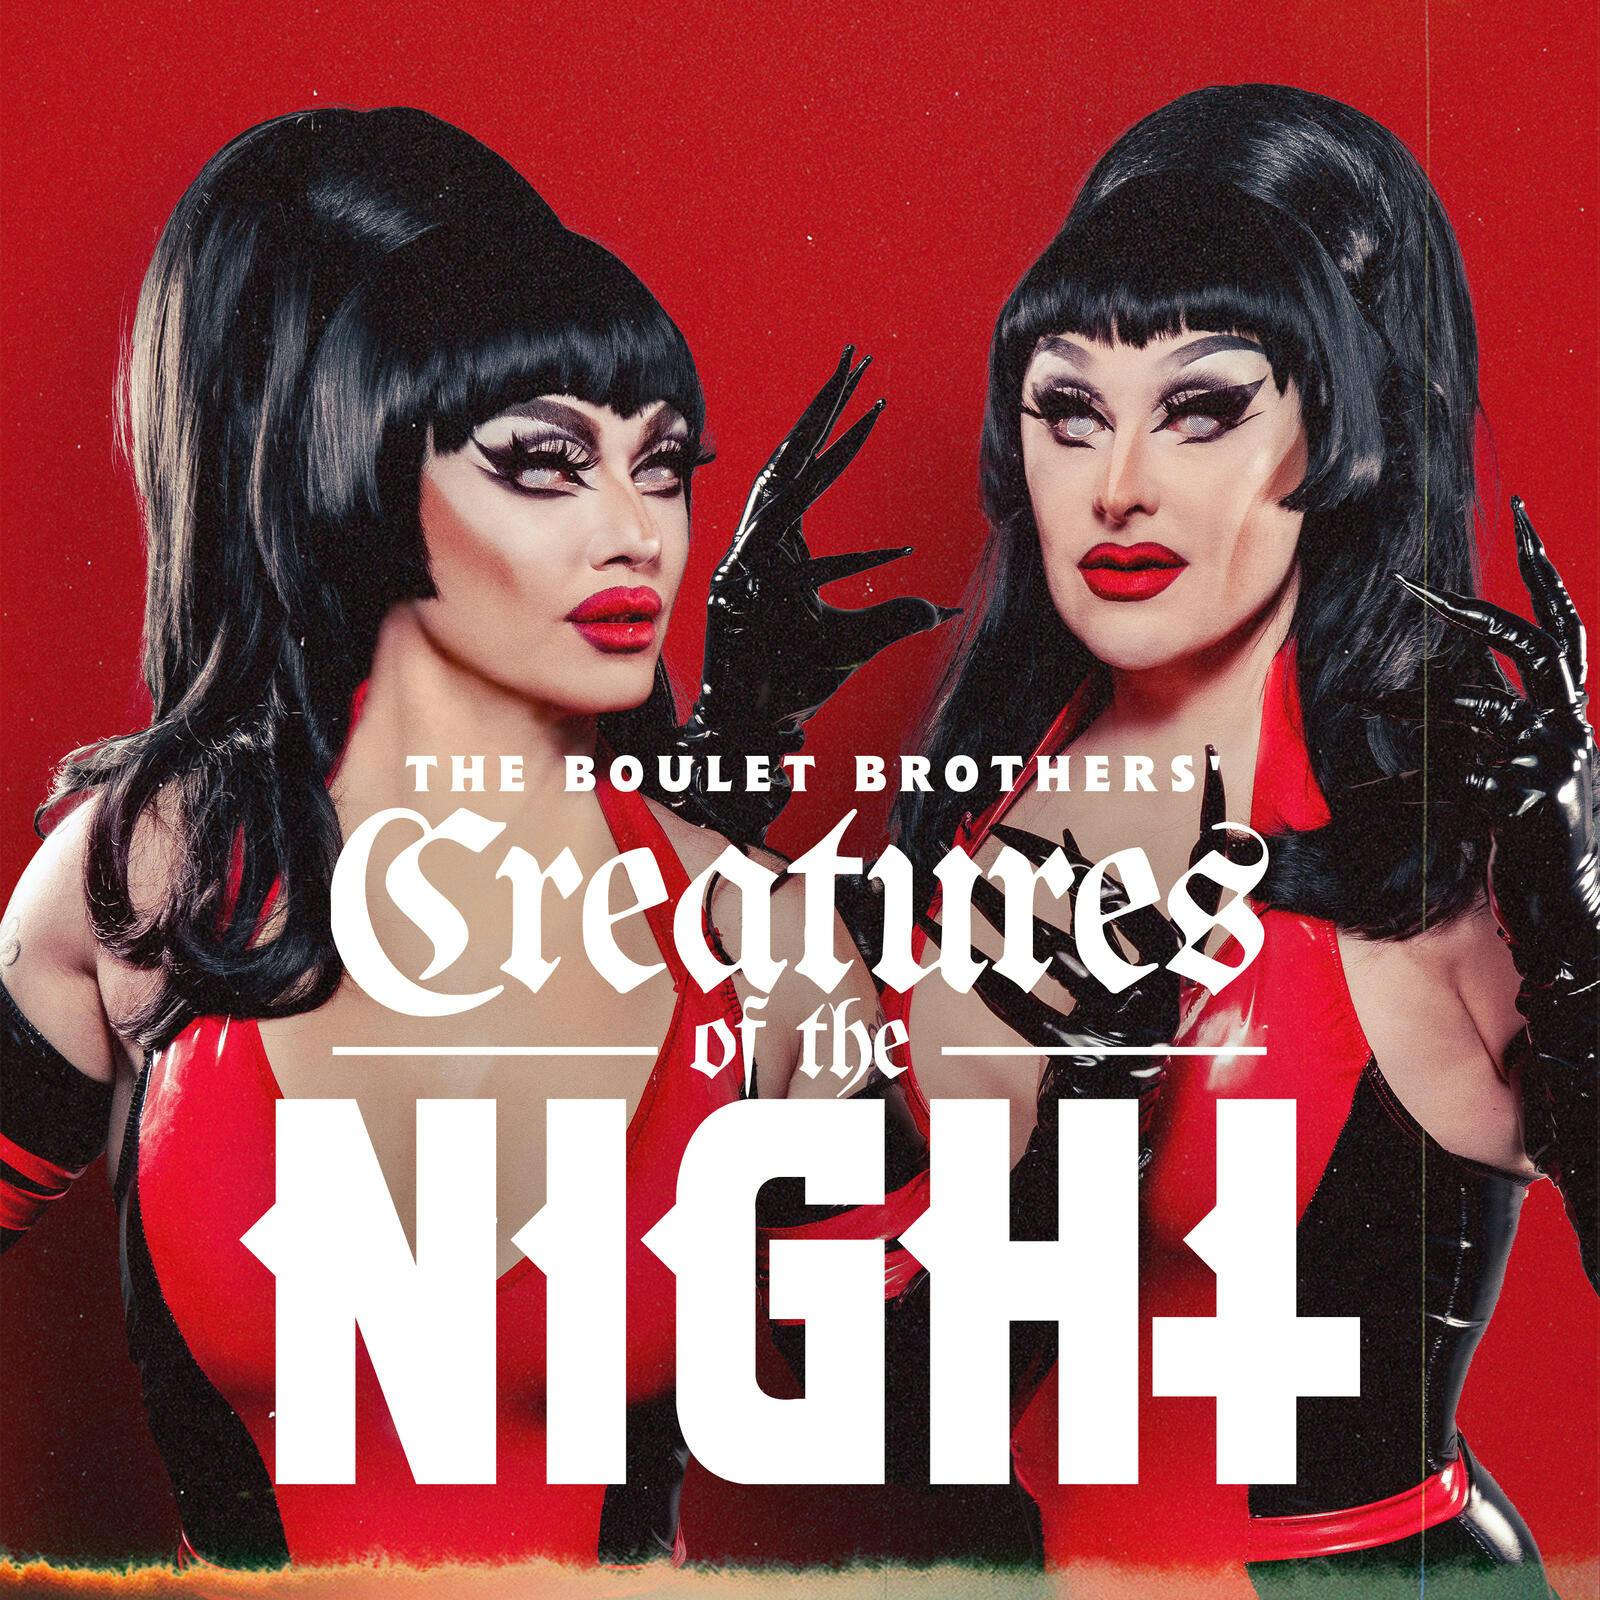 The Boulet Brothers’ Dragula Casting Special